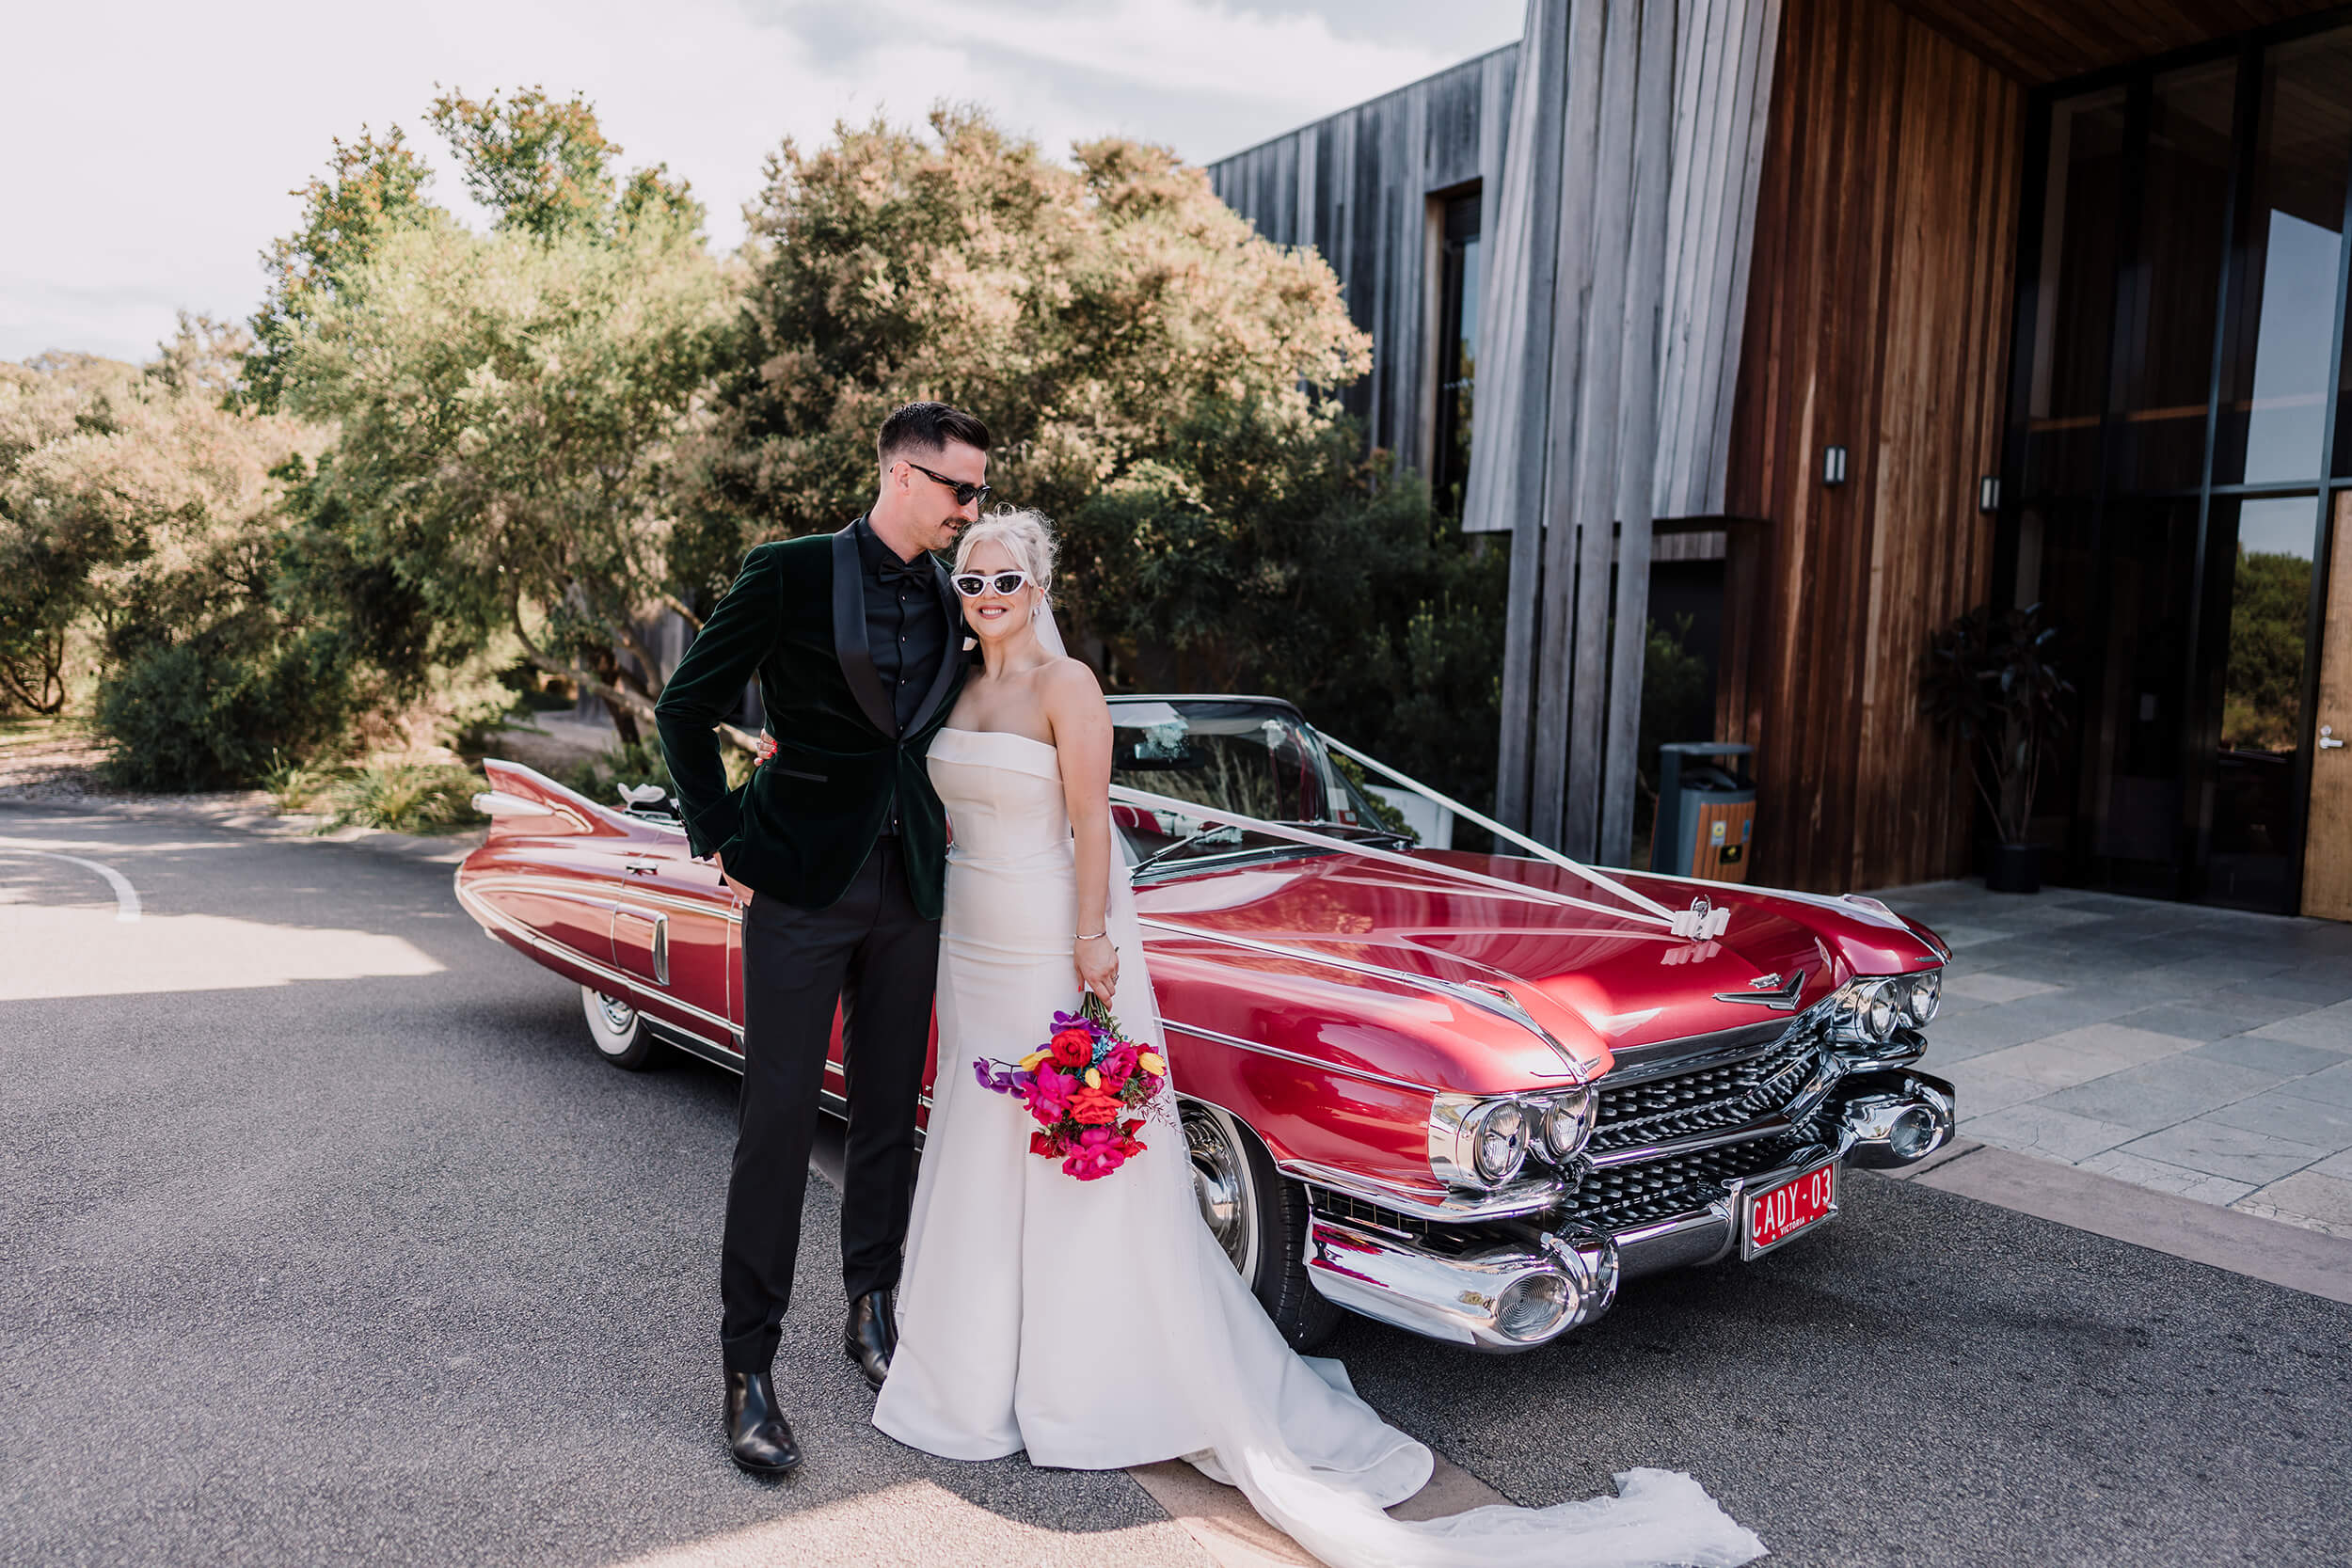 Bride and groom happily posing with shades on beside a red convertible cadillac as their wedding car. Captured by Black Avenue Productions